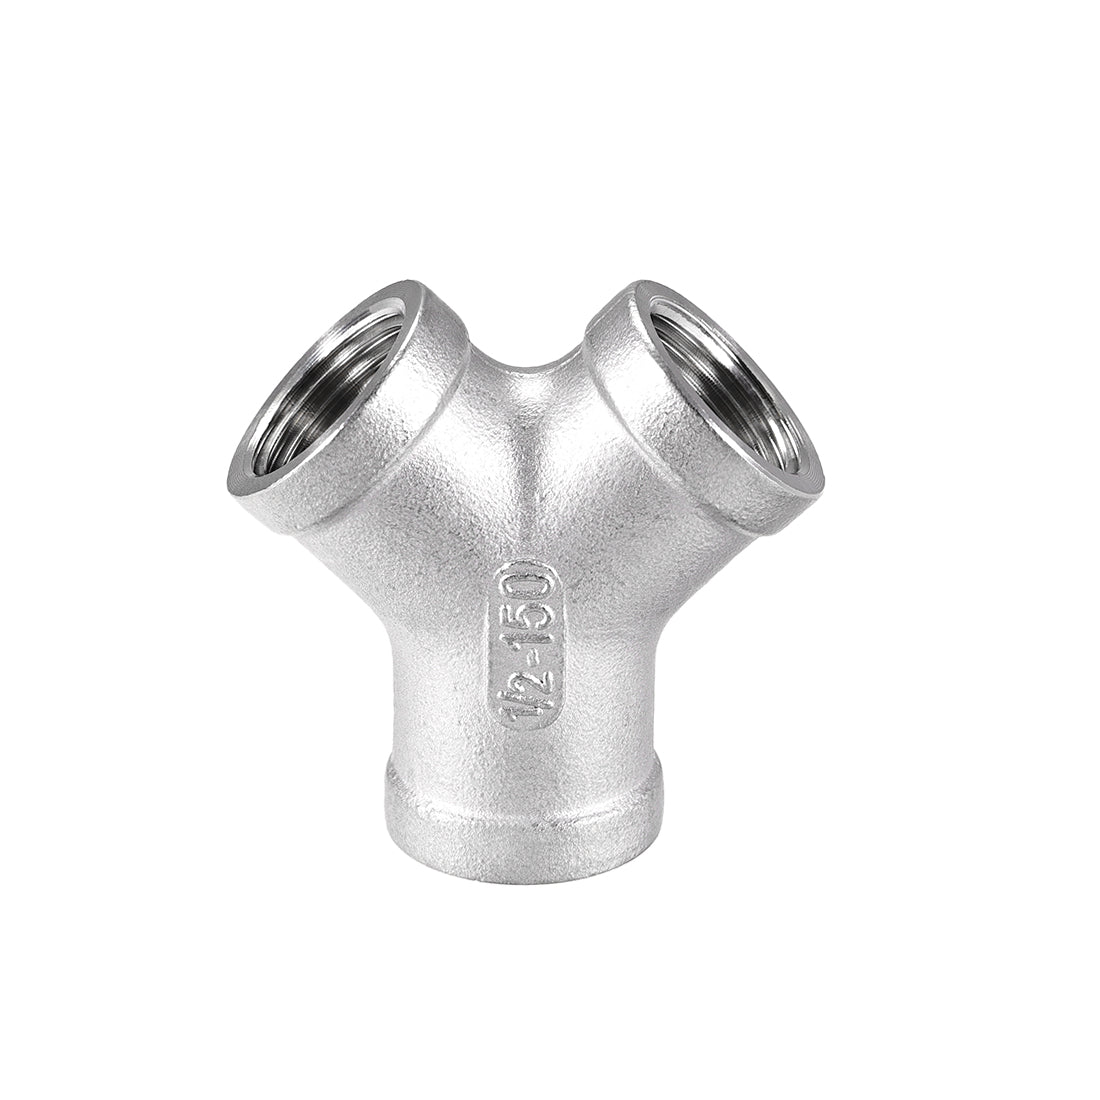 uxcell Pipe Fitting G1/2 1 Female to 2 Male Thread Y Shape 3 Ways